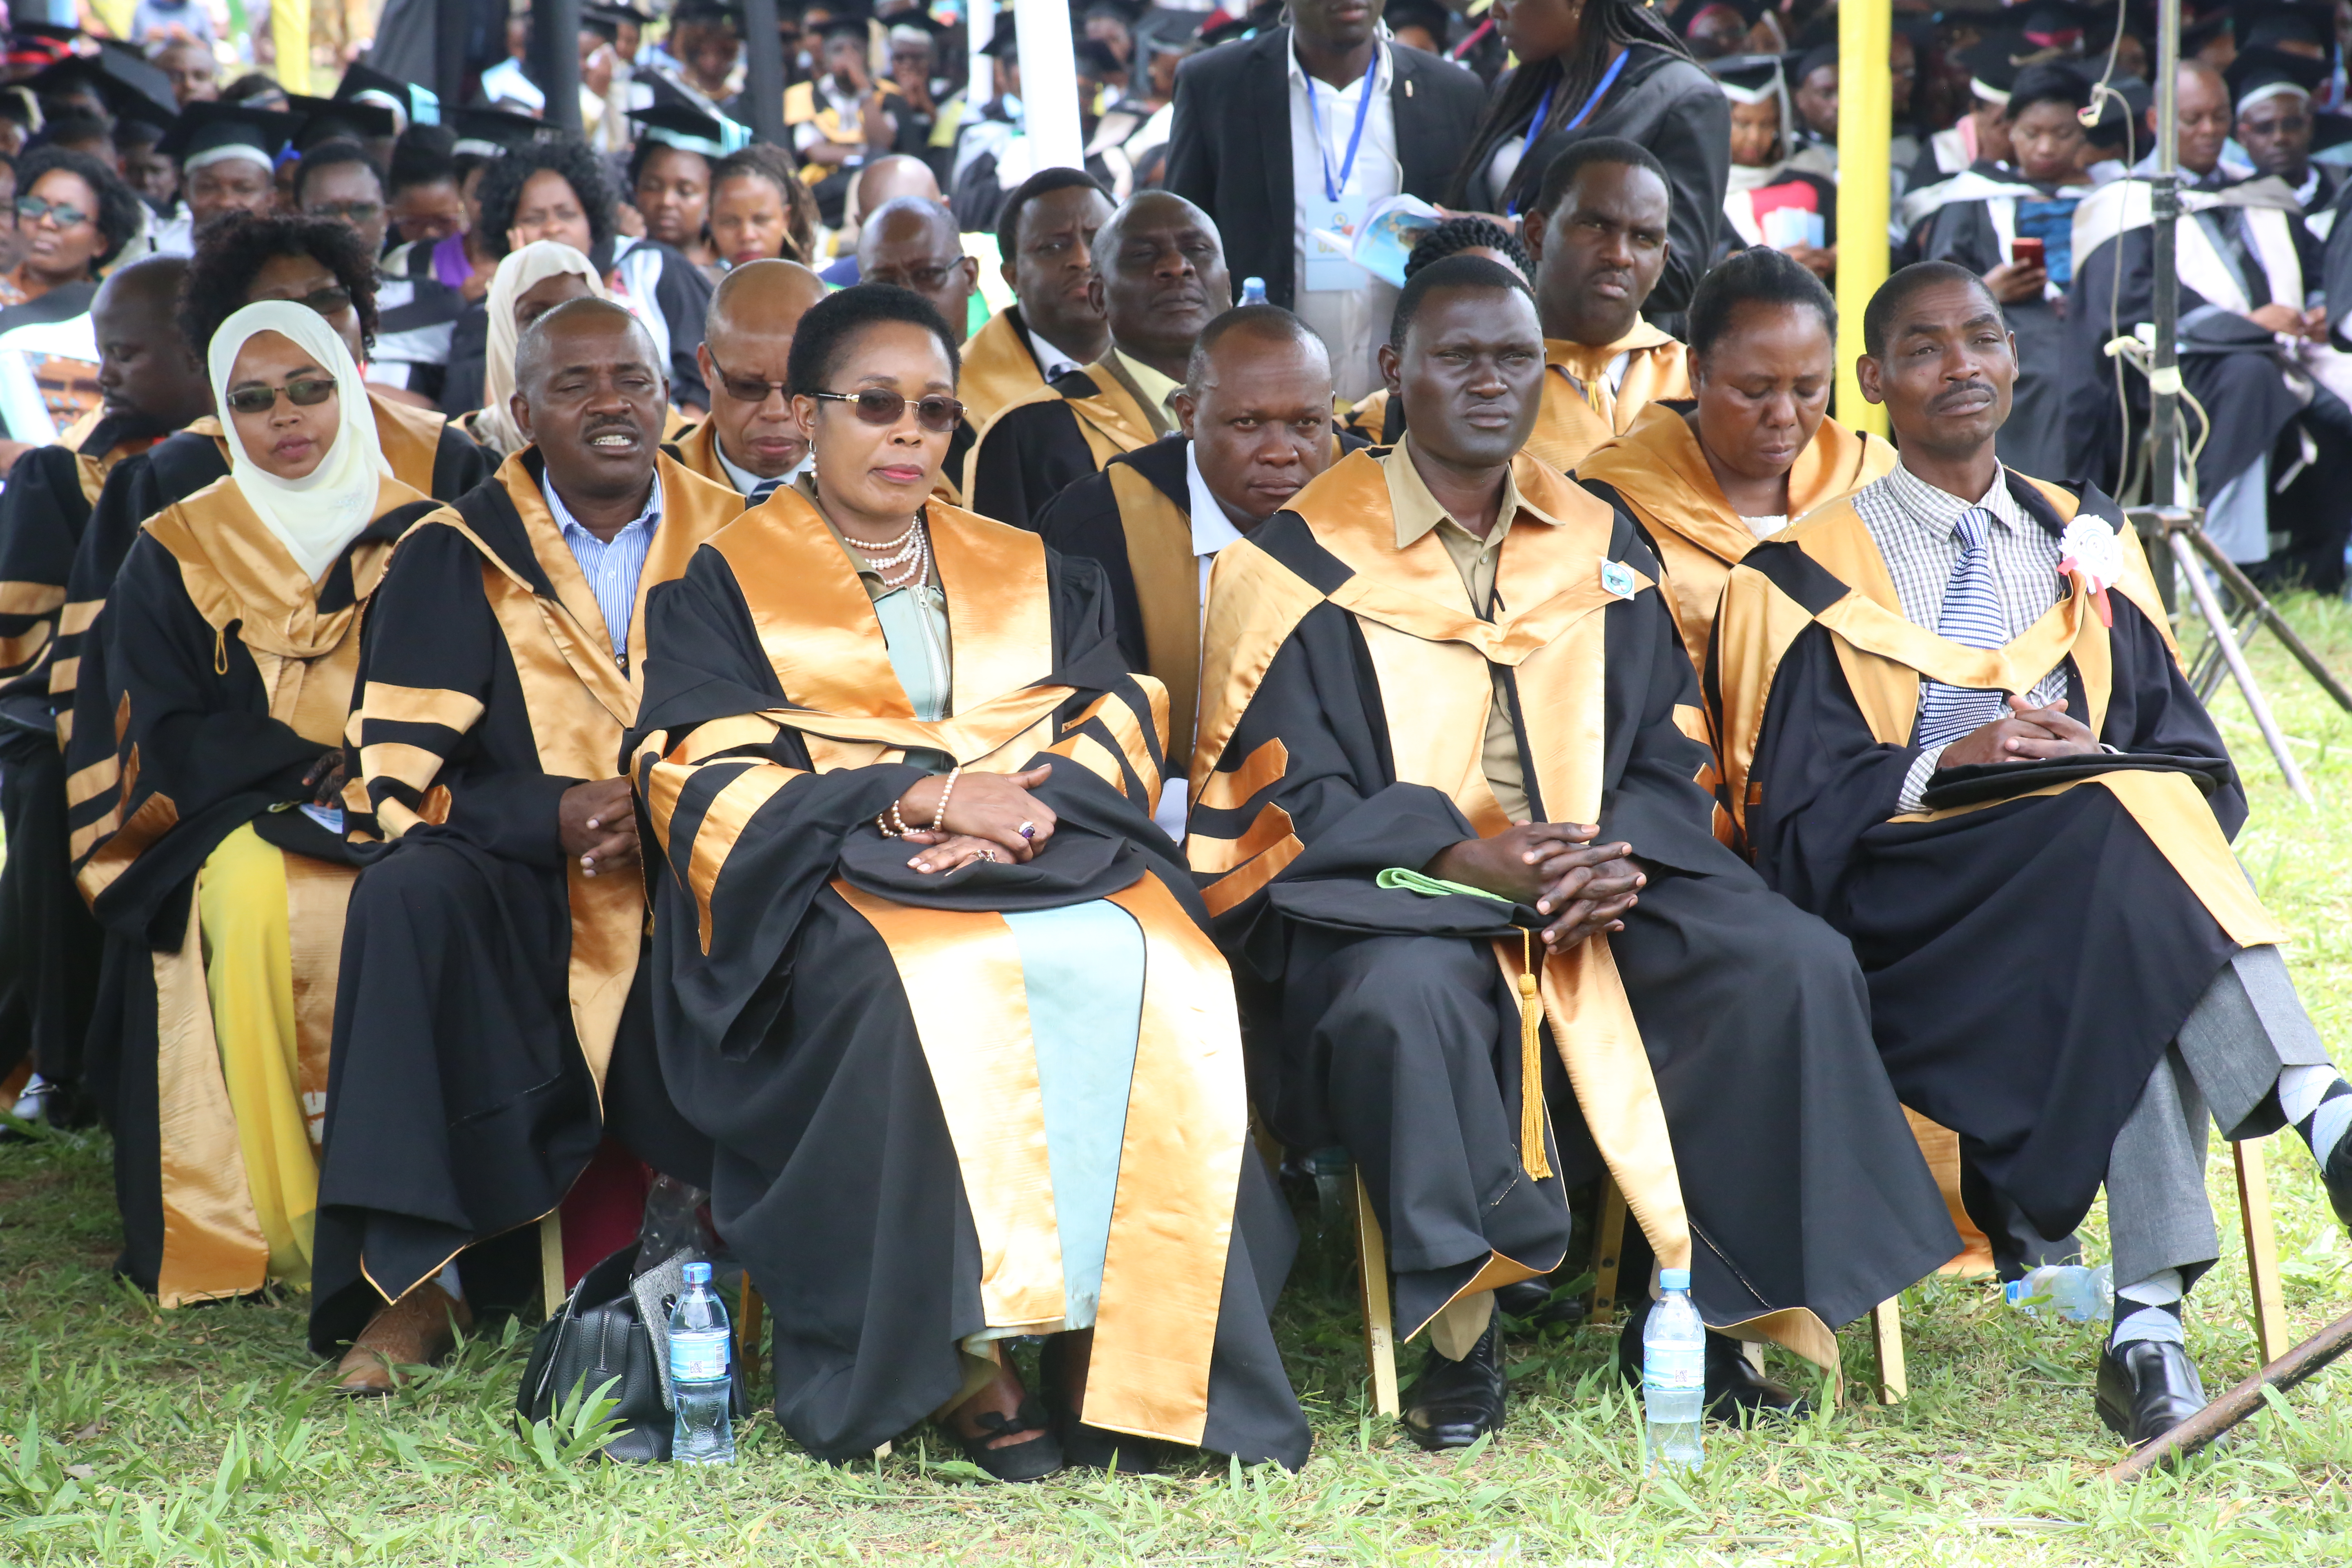 PhD graduates listening to various speeches during the 37th graduation ceremonyof the Open University of Tanzania held on 28th September 2019 at Bungo, Kibaha